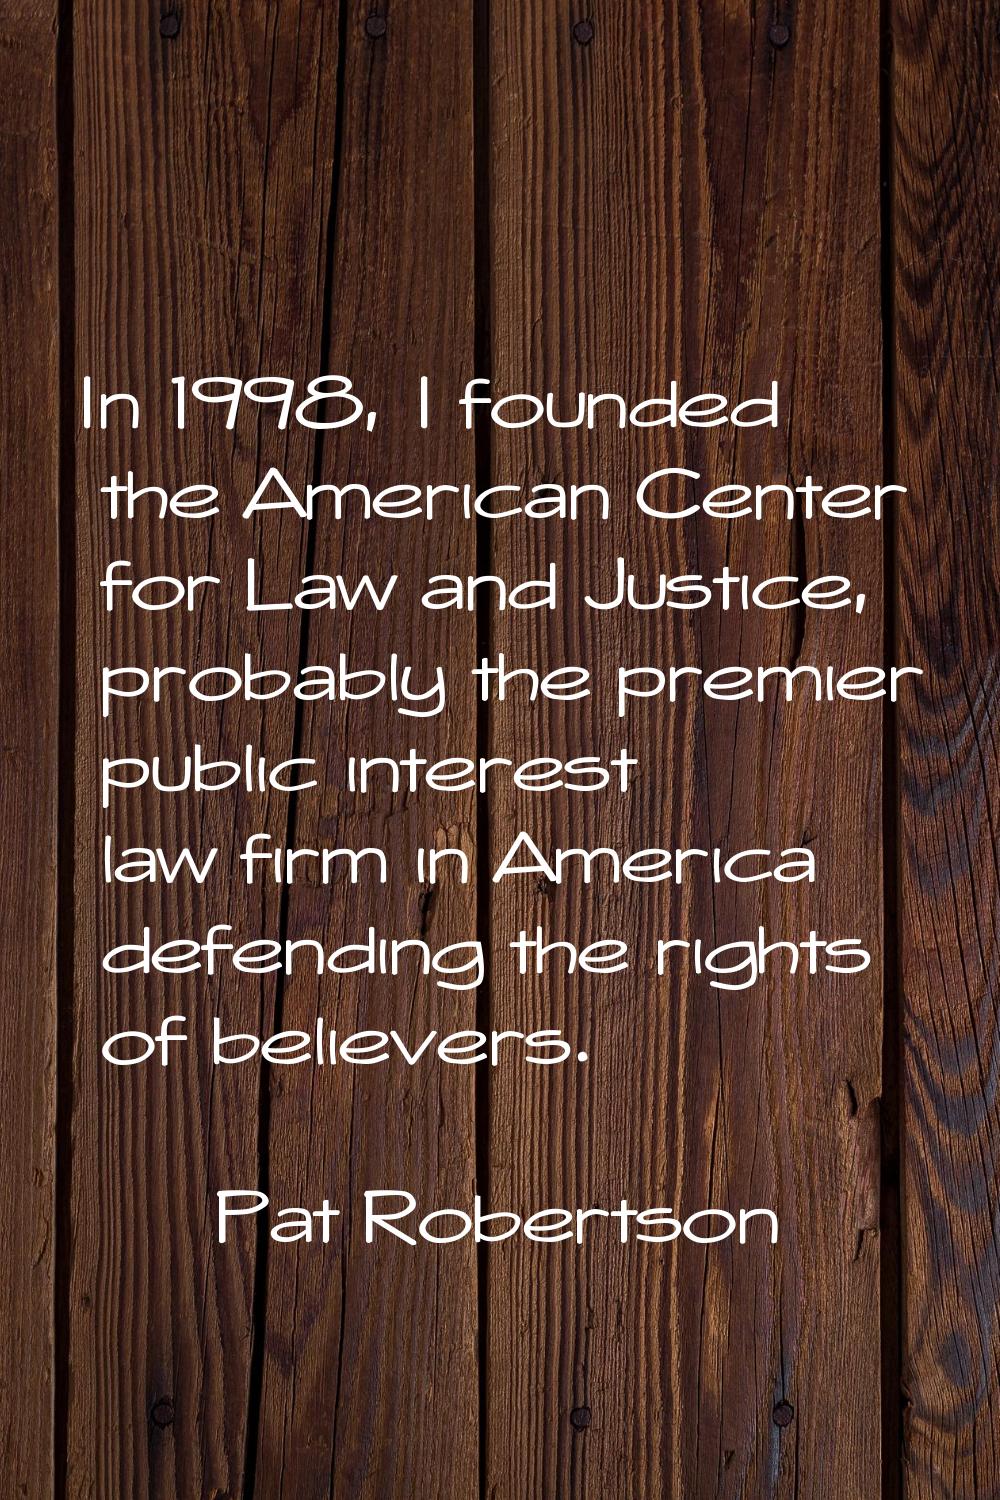 In 1998, I founded the American Center for Law and Justice, probably the premier public interest la